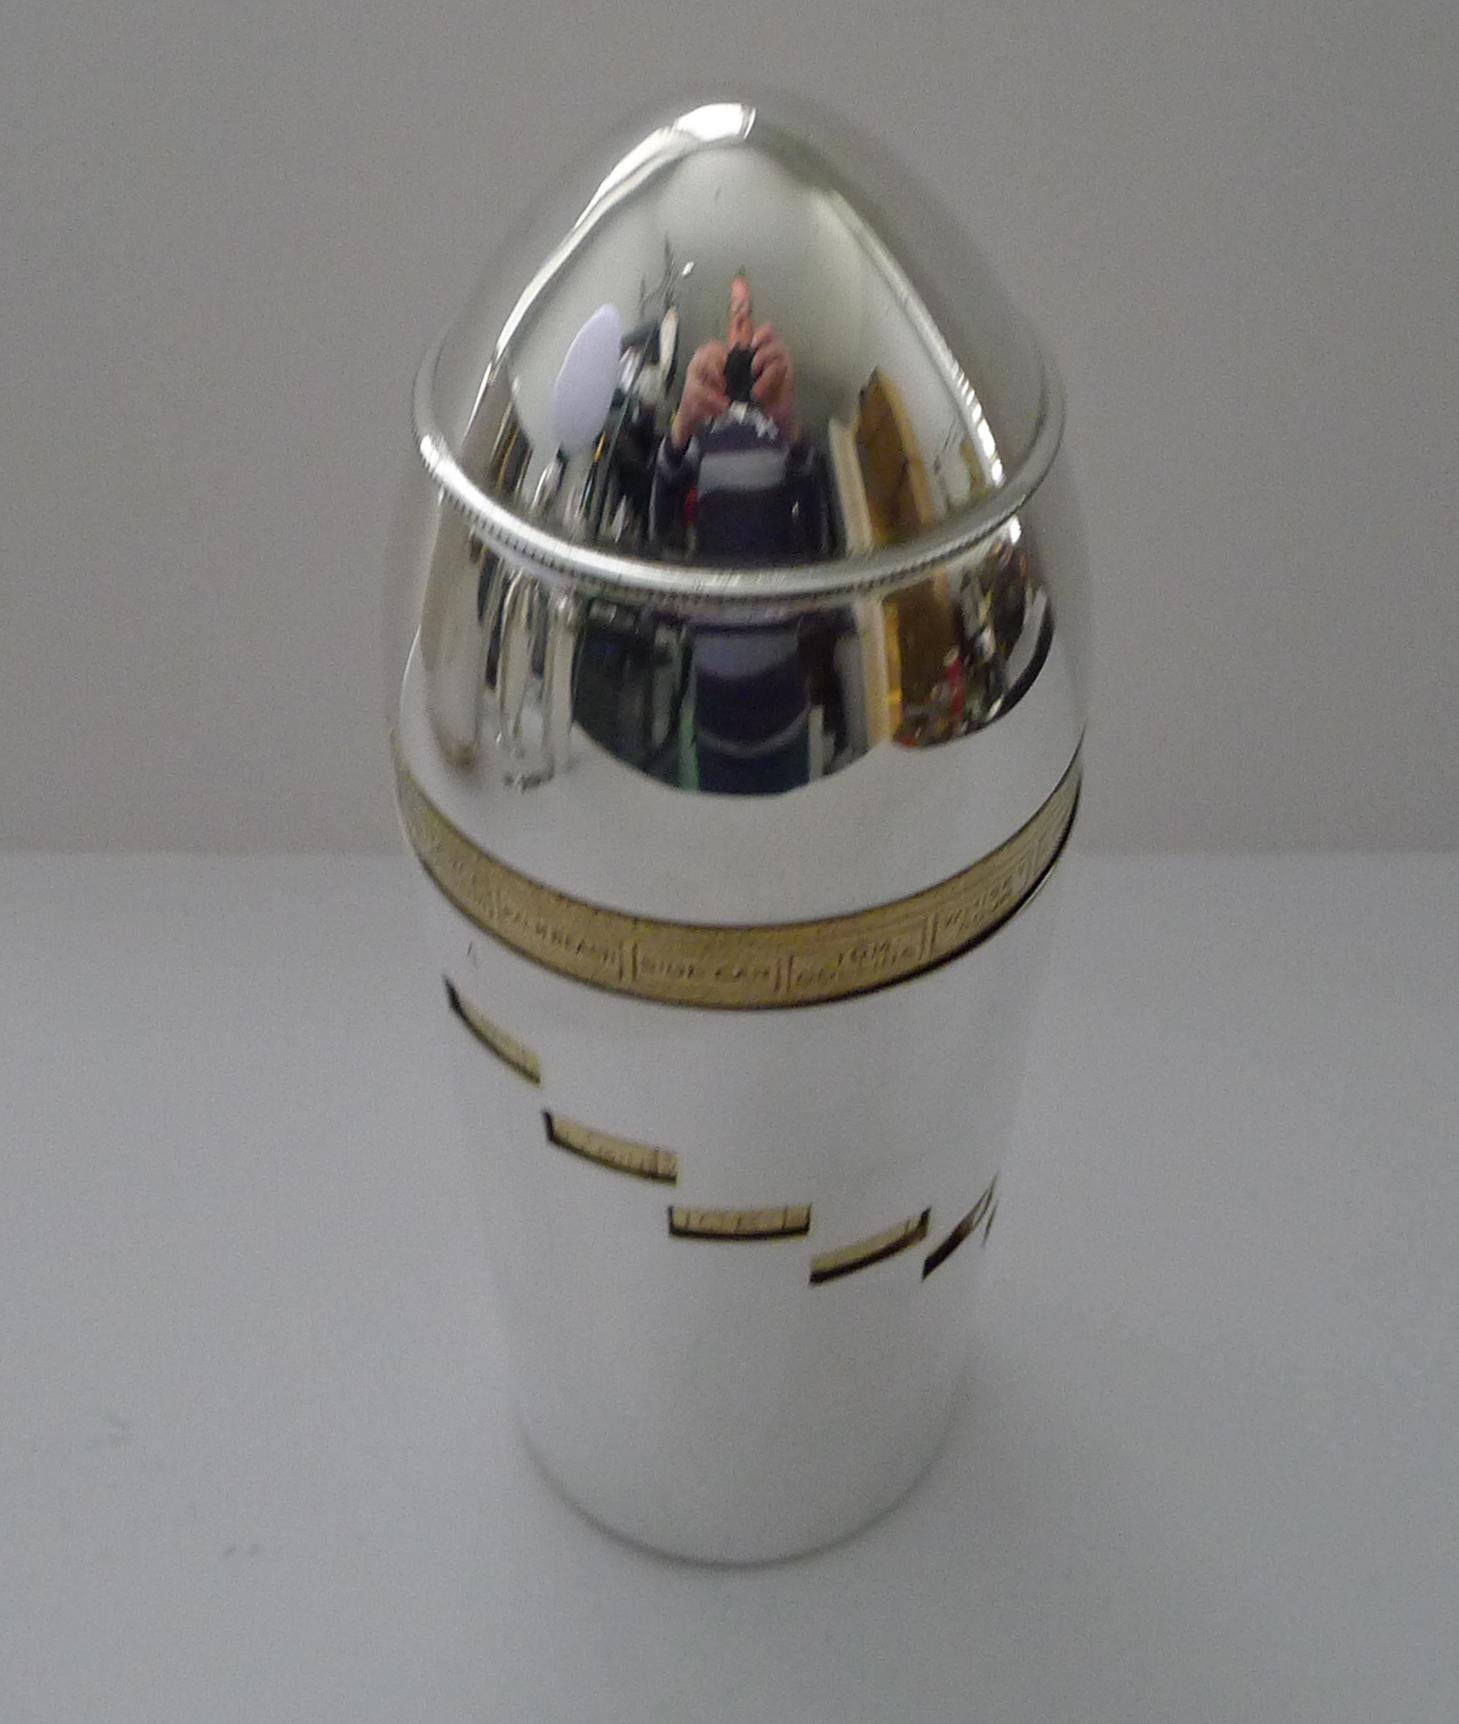 A magnificent vintage Italian cocktail shaker in silver and gold plate dating to circa 1940.

Shaped in the form of a bullet, the body is made up of two components, gold plated on the inside and silver plated on the outer wall; choose your desired